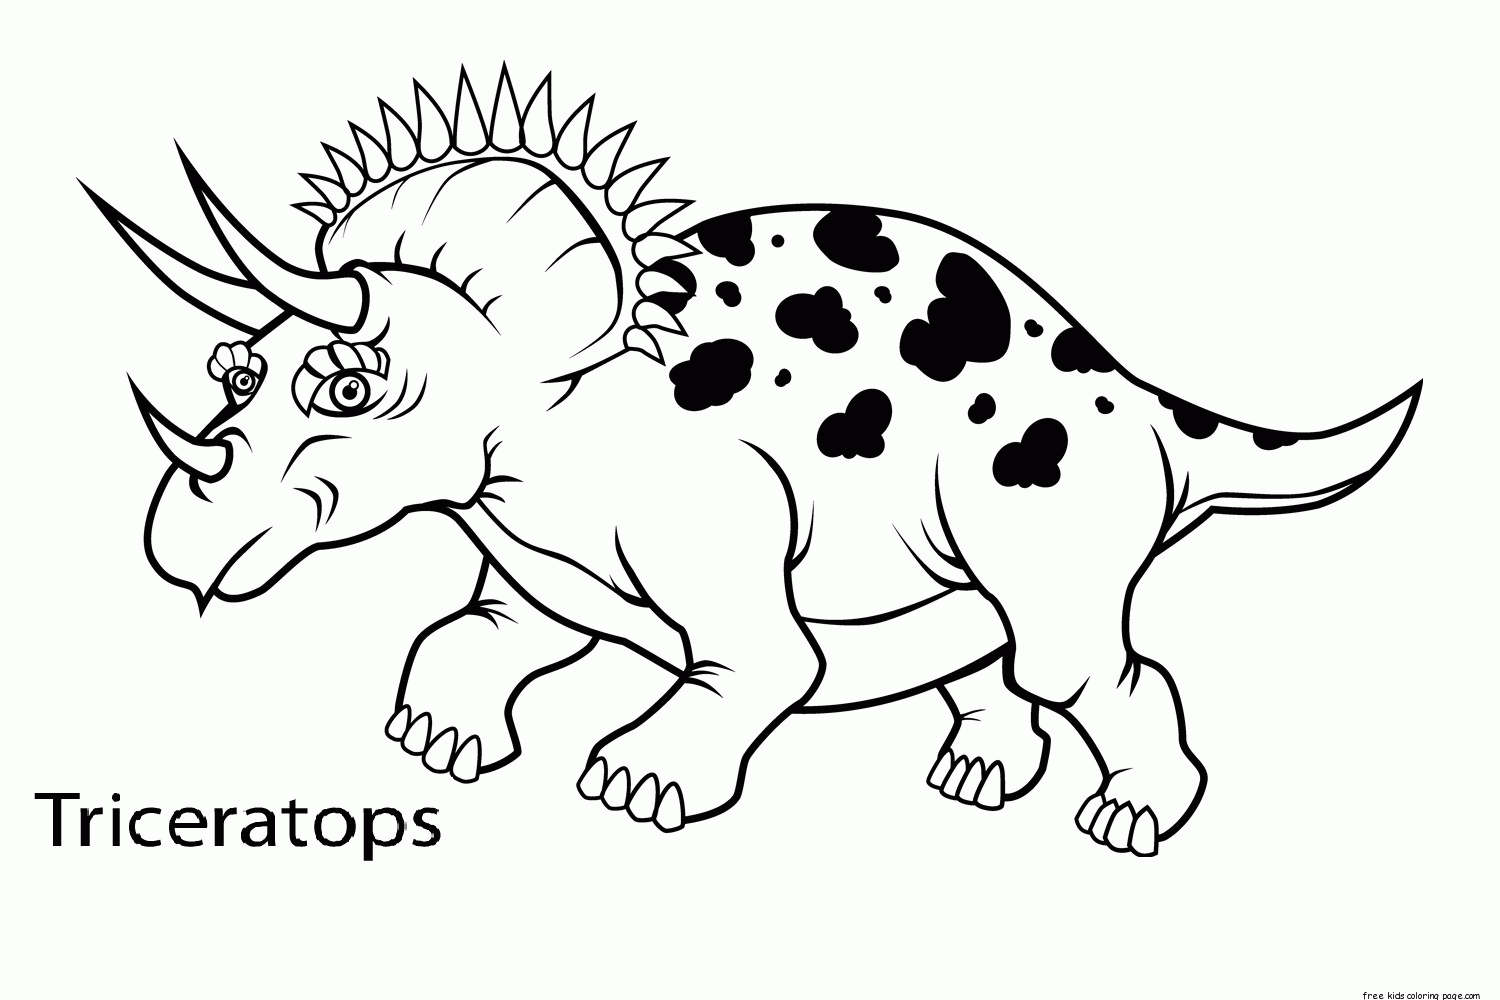 free-dinosaur-coloring-pages-for-preschoolers-download-free-dinosaur